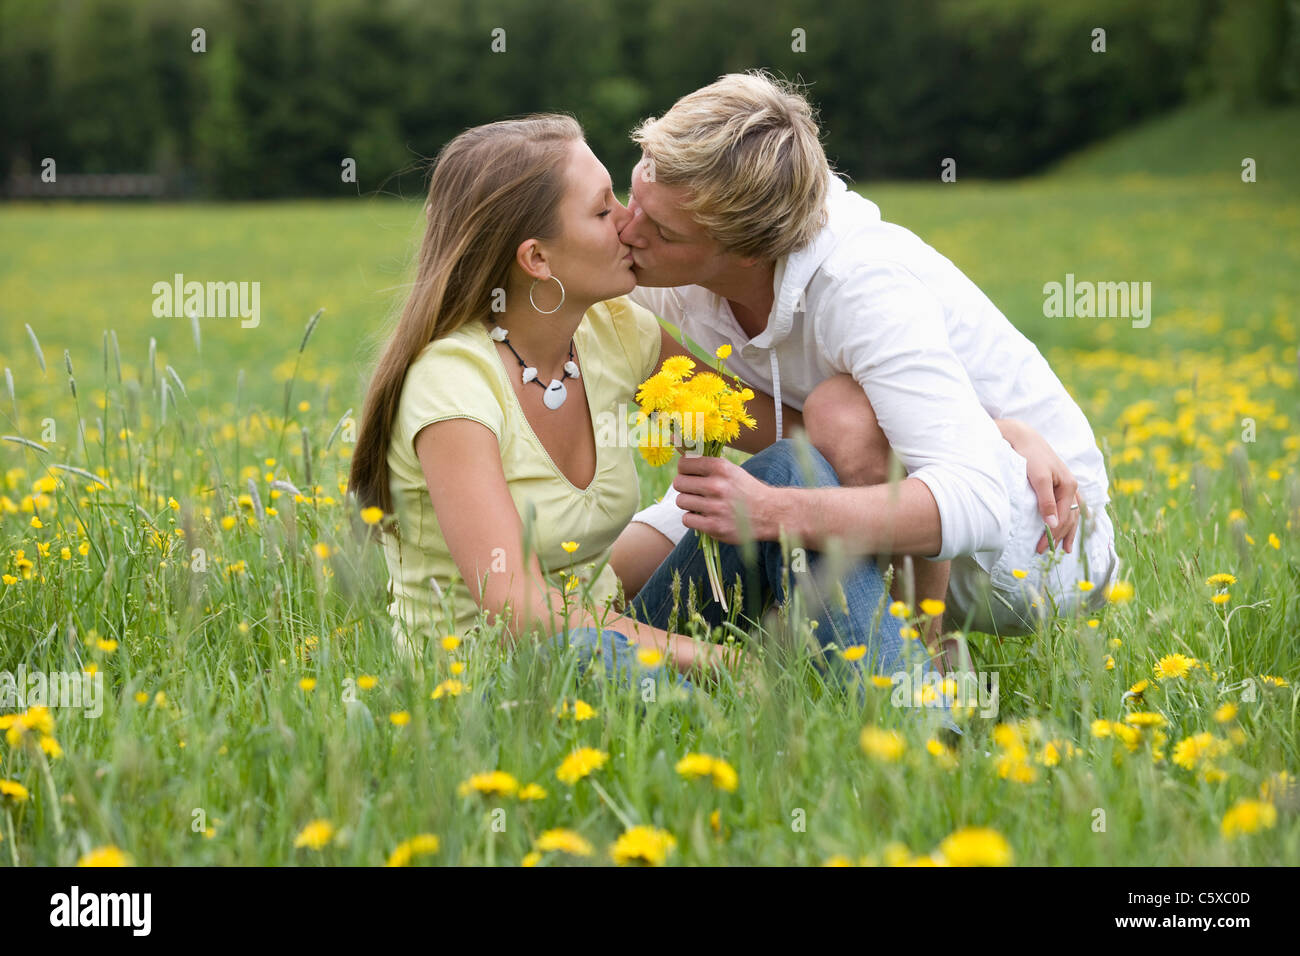 Austria Young Couple Kissing In Meadow Eyes Closed Portrait Stock Photo Alamy